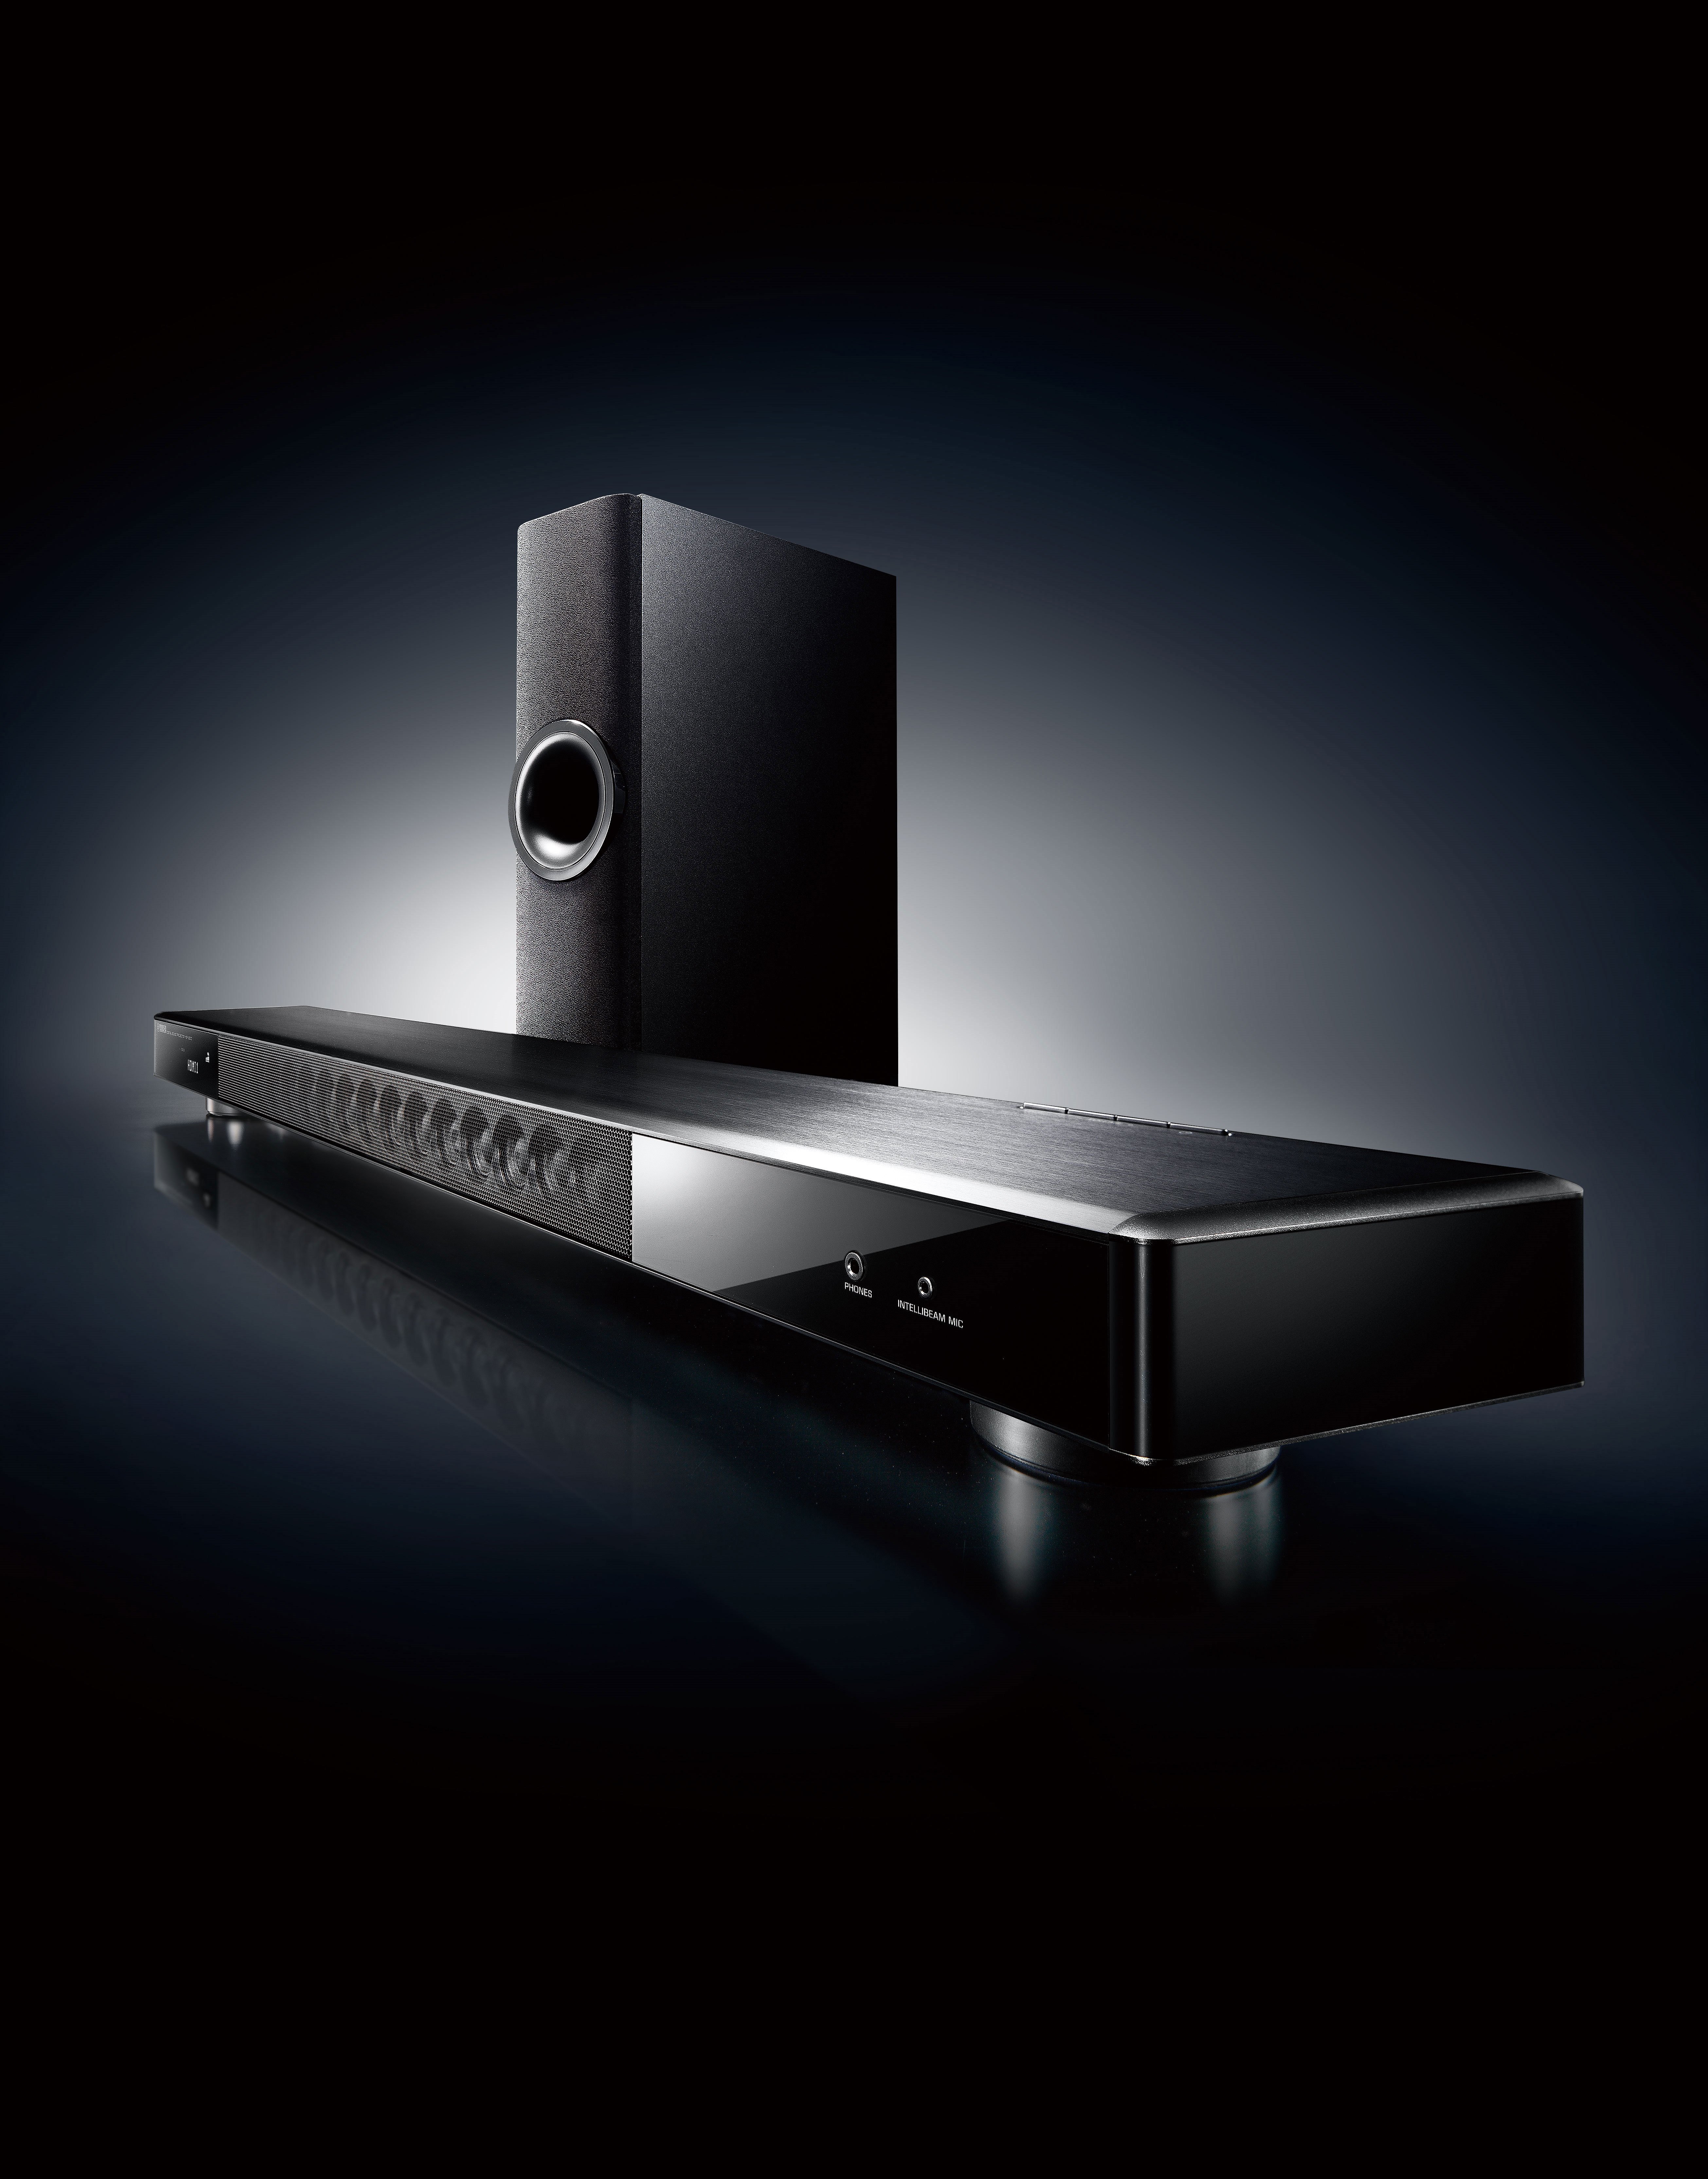 YSP-2500 - Overview - Sound Bars - Audio & Visual - Products ...